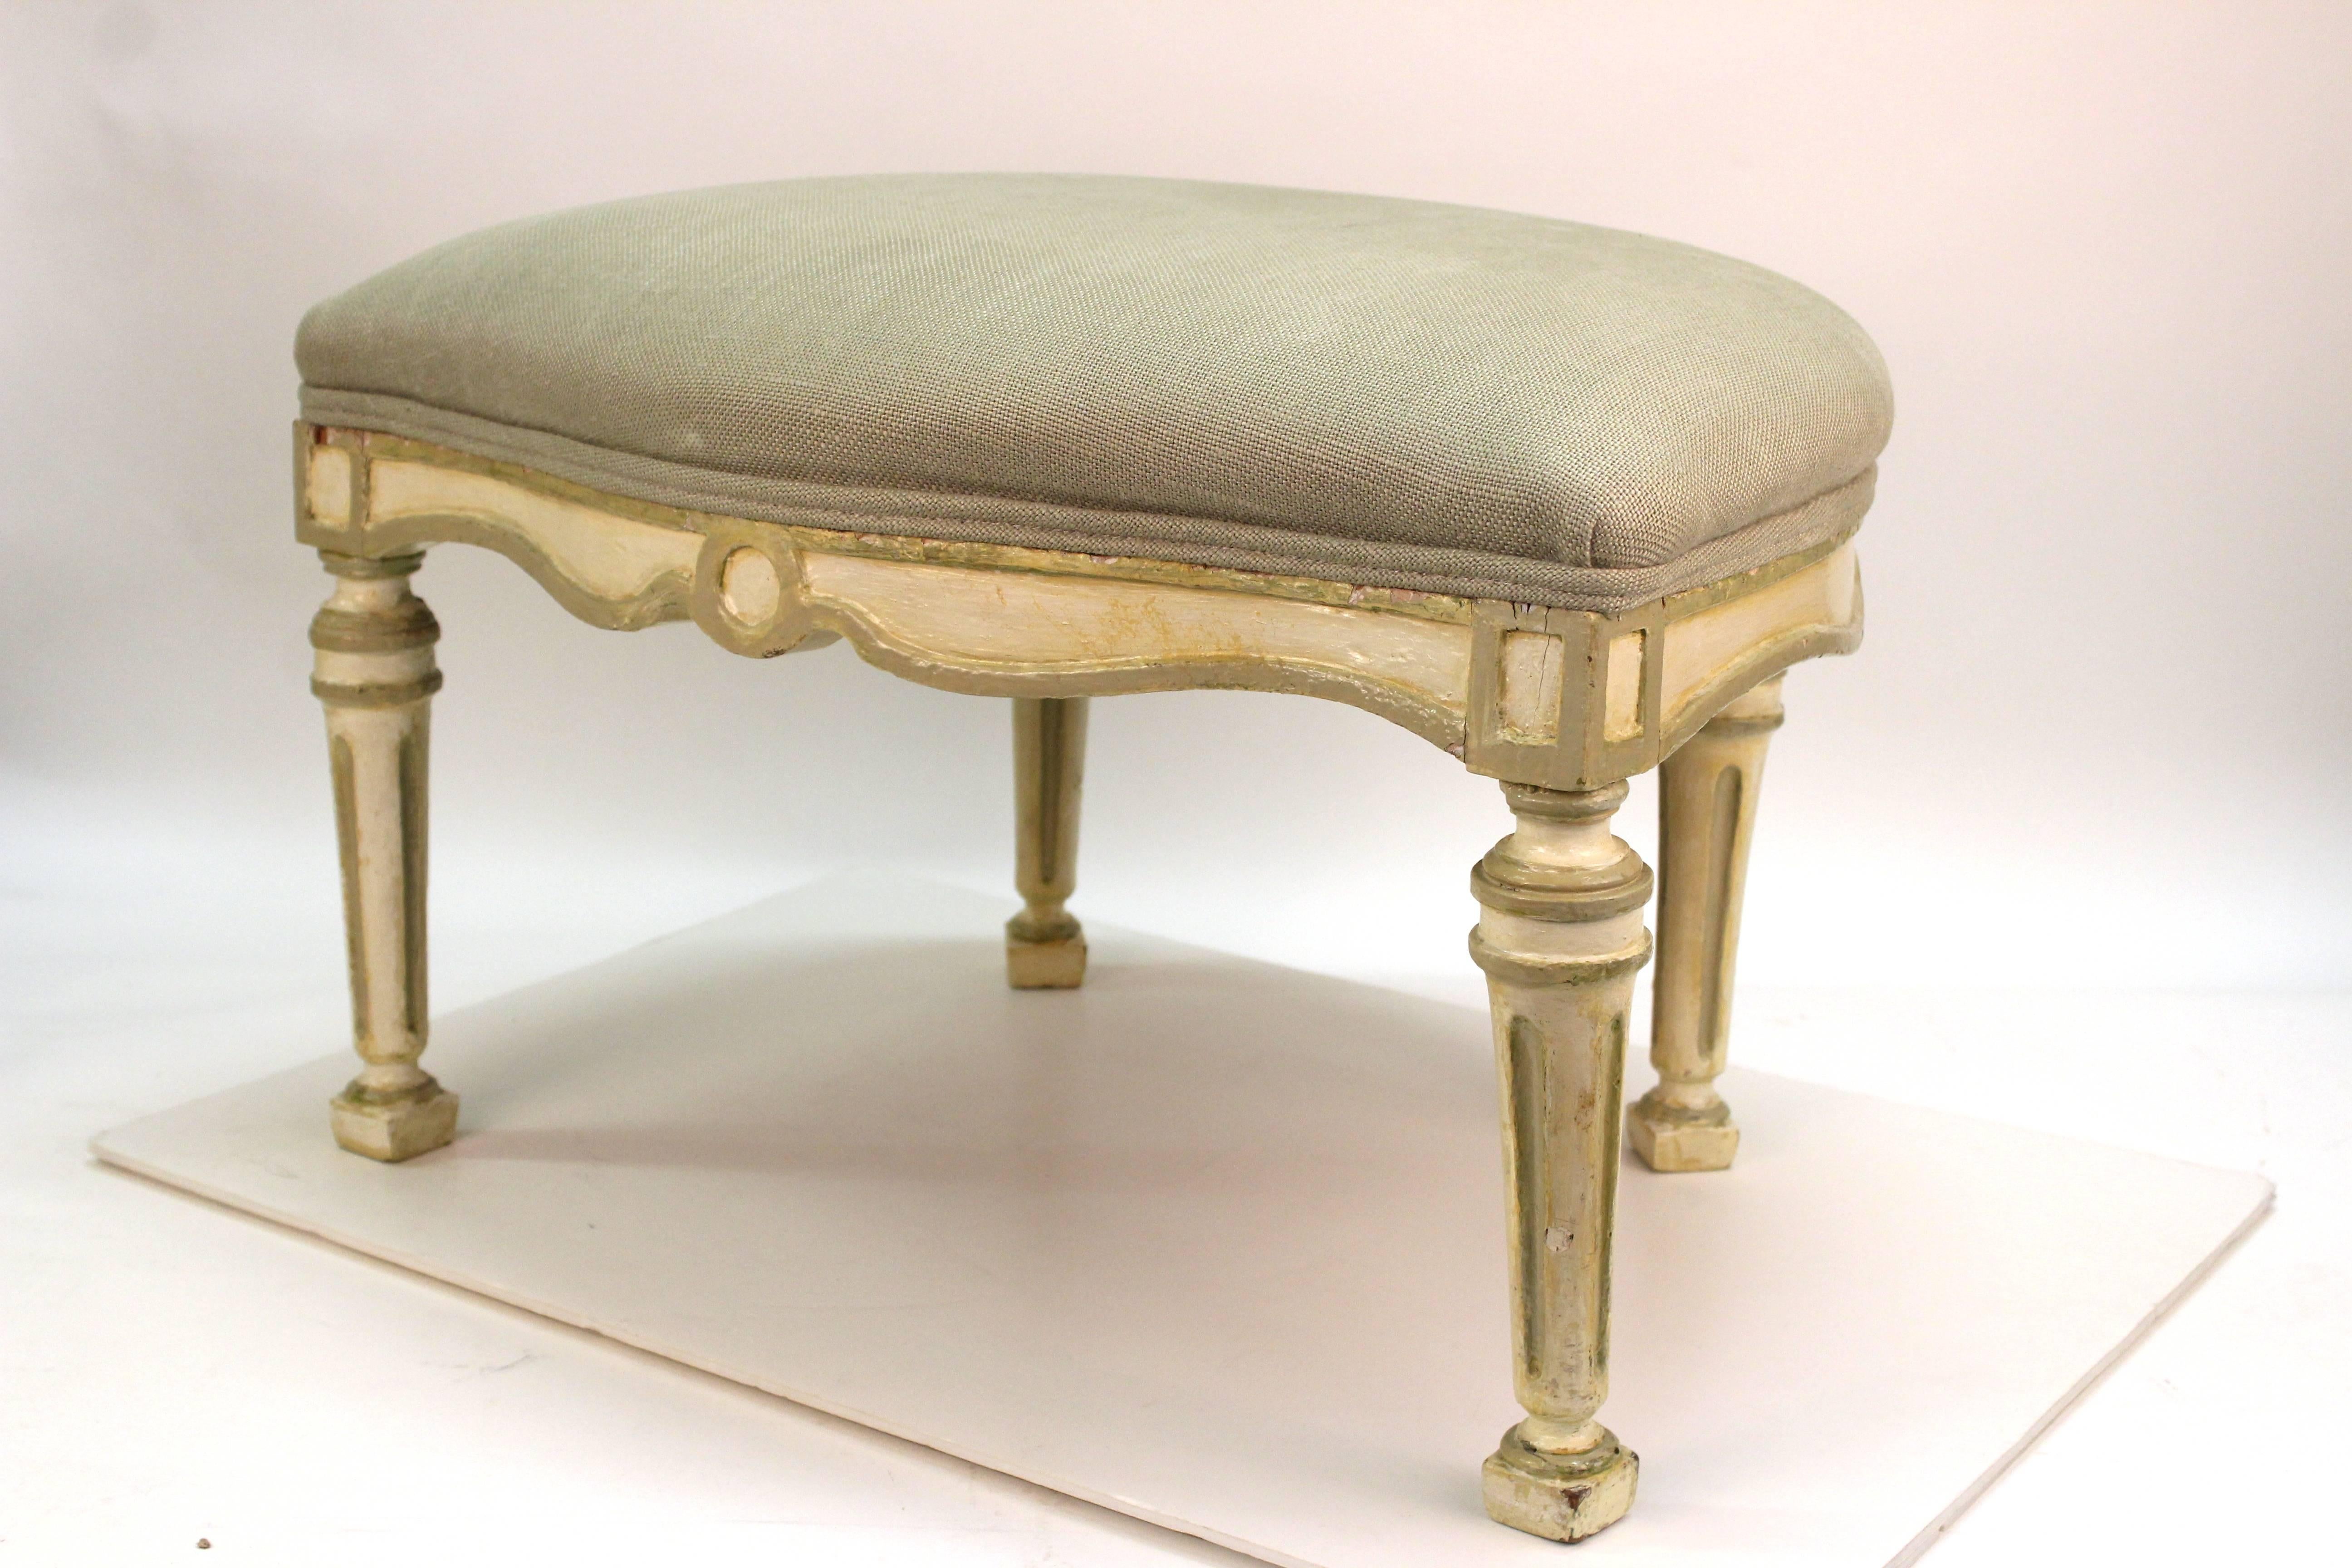 Directoire style wooden bench from France. Painted in cream with darker accents. The seat is upholstered in pale green. Wear appropriate to age and material; with some chips to the wood and paint loss. The piece is in good vintage condition.